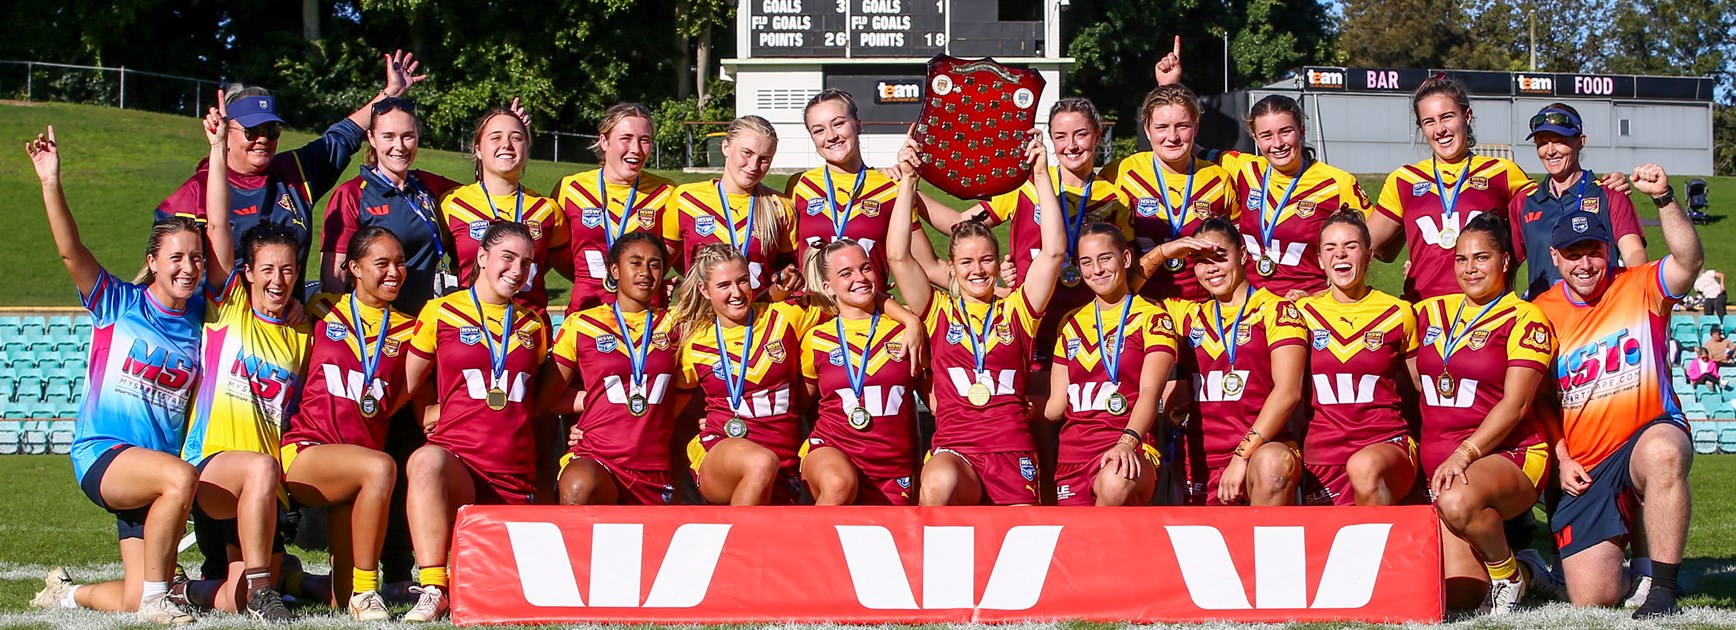 Country steals U19s Women's win in extra time thriller